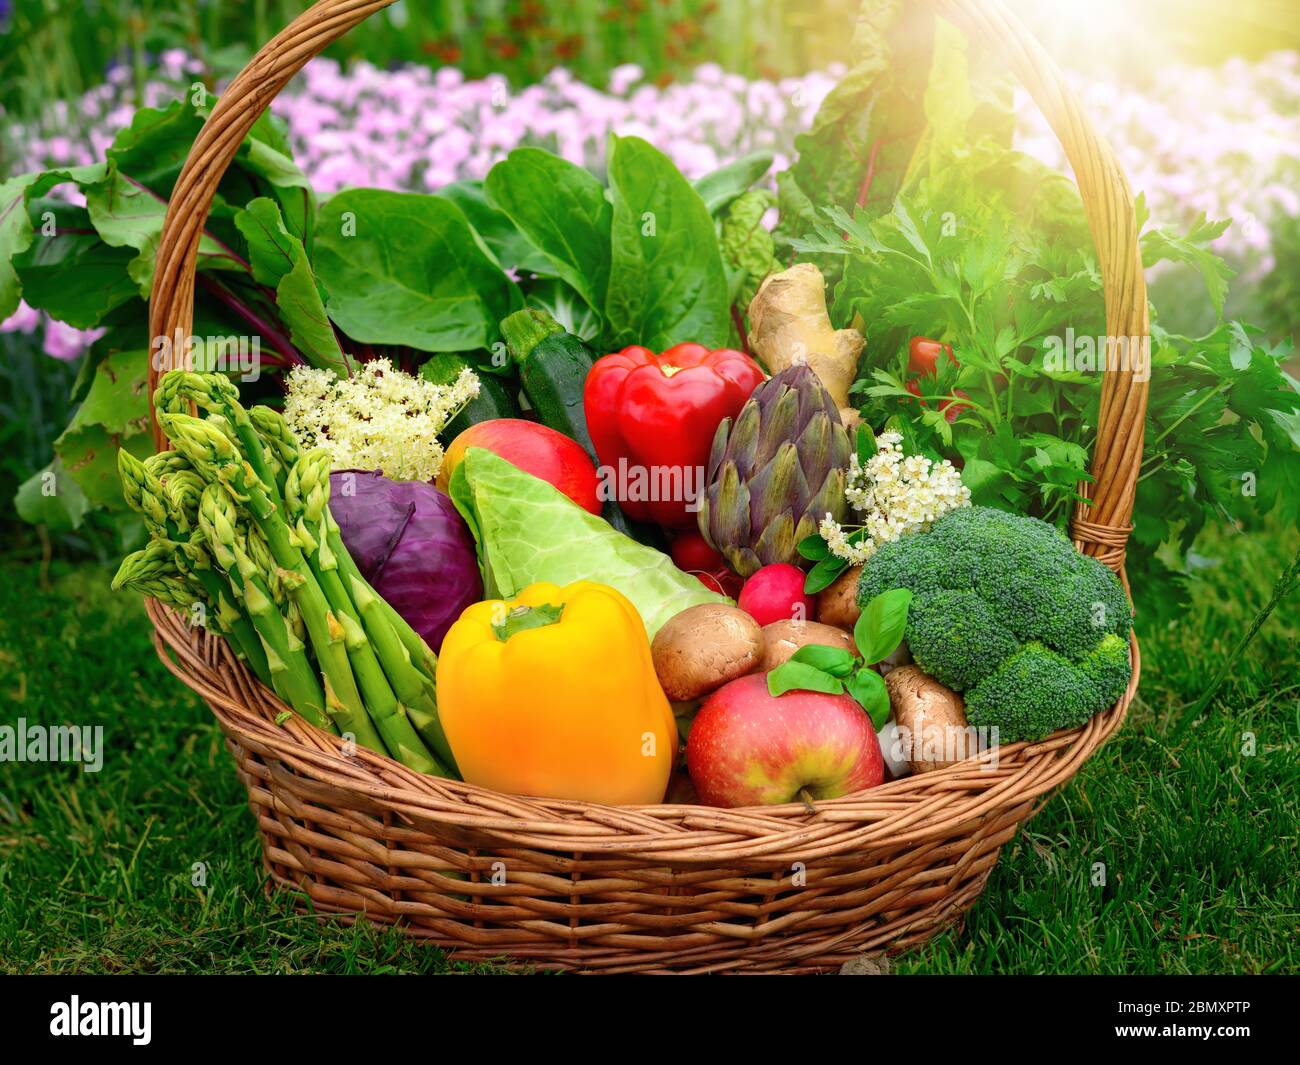 Colorful and appetizing vegetables and fruits in a nice old-fashioned basket in the garden, with grass and flowers in the background Stock Photo